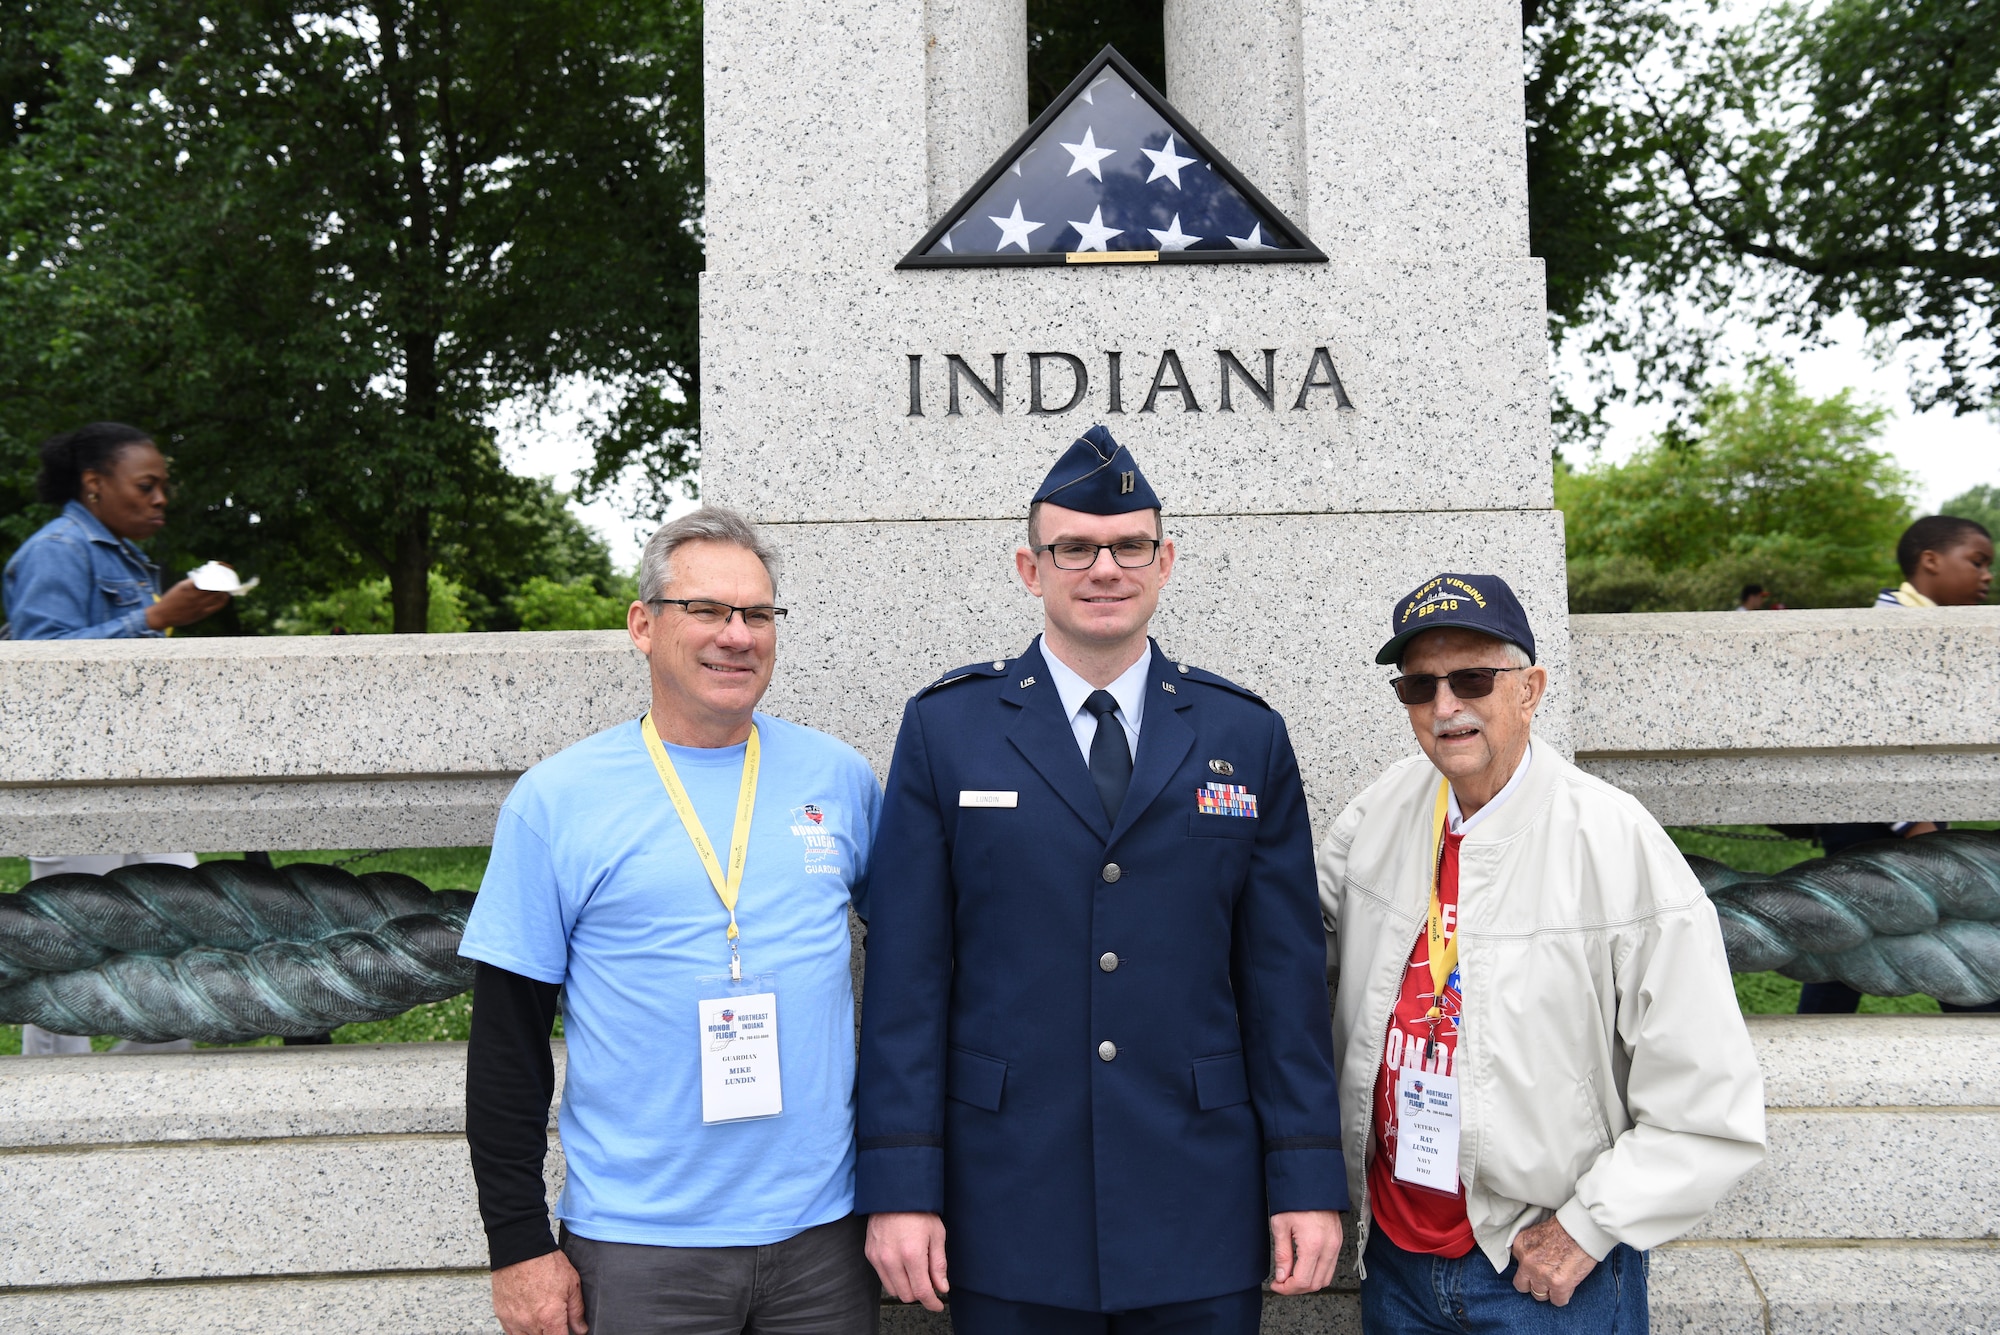 First Lt. Nicholas Lundin, 480th Intelligence, Reconnaissance and Surveillance Wing chief of current operations, stands between his dad Michael Lundin and grandfather Ray Lundin after his promotion ceremony May 24, 2017 at the World War II memorial in Washington D.C. Lundin’s grandfather served in the Pacific for the U.S. Navy during World War II and was selected to travel to the nation’s Capital through an Honor Flight program in Northeast Indiana. The program affords WWII veterans the opportunity to fly for free to visit and reflect at their respective memorial. (U.S. Air Force photo by Tech. Sgt. Darnell T. Cannady)